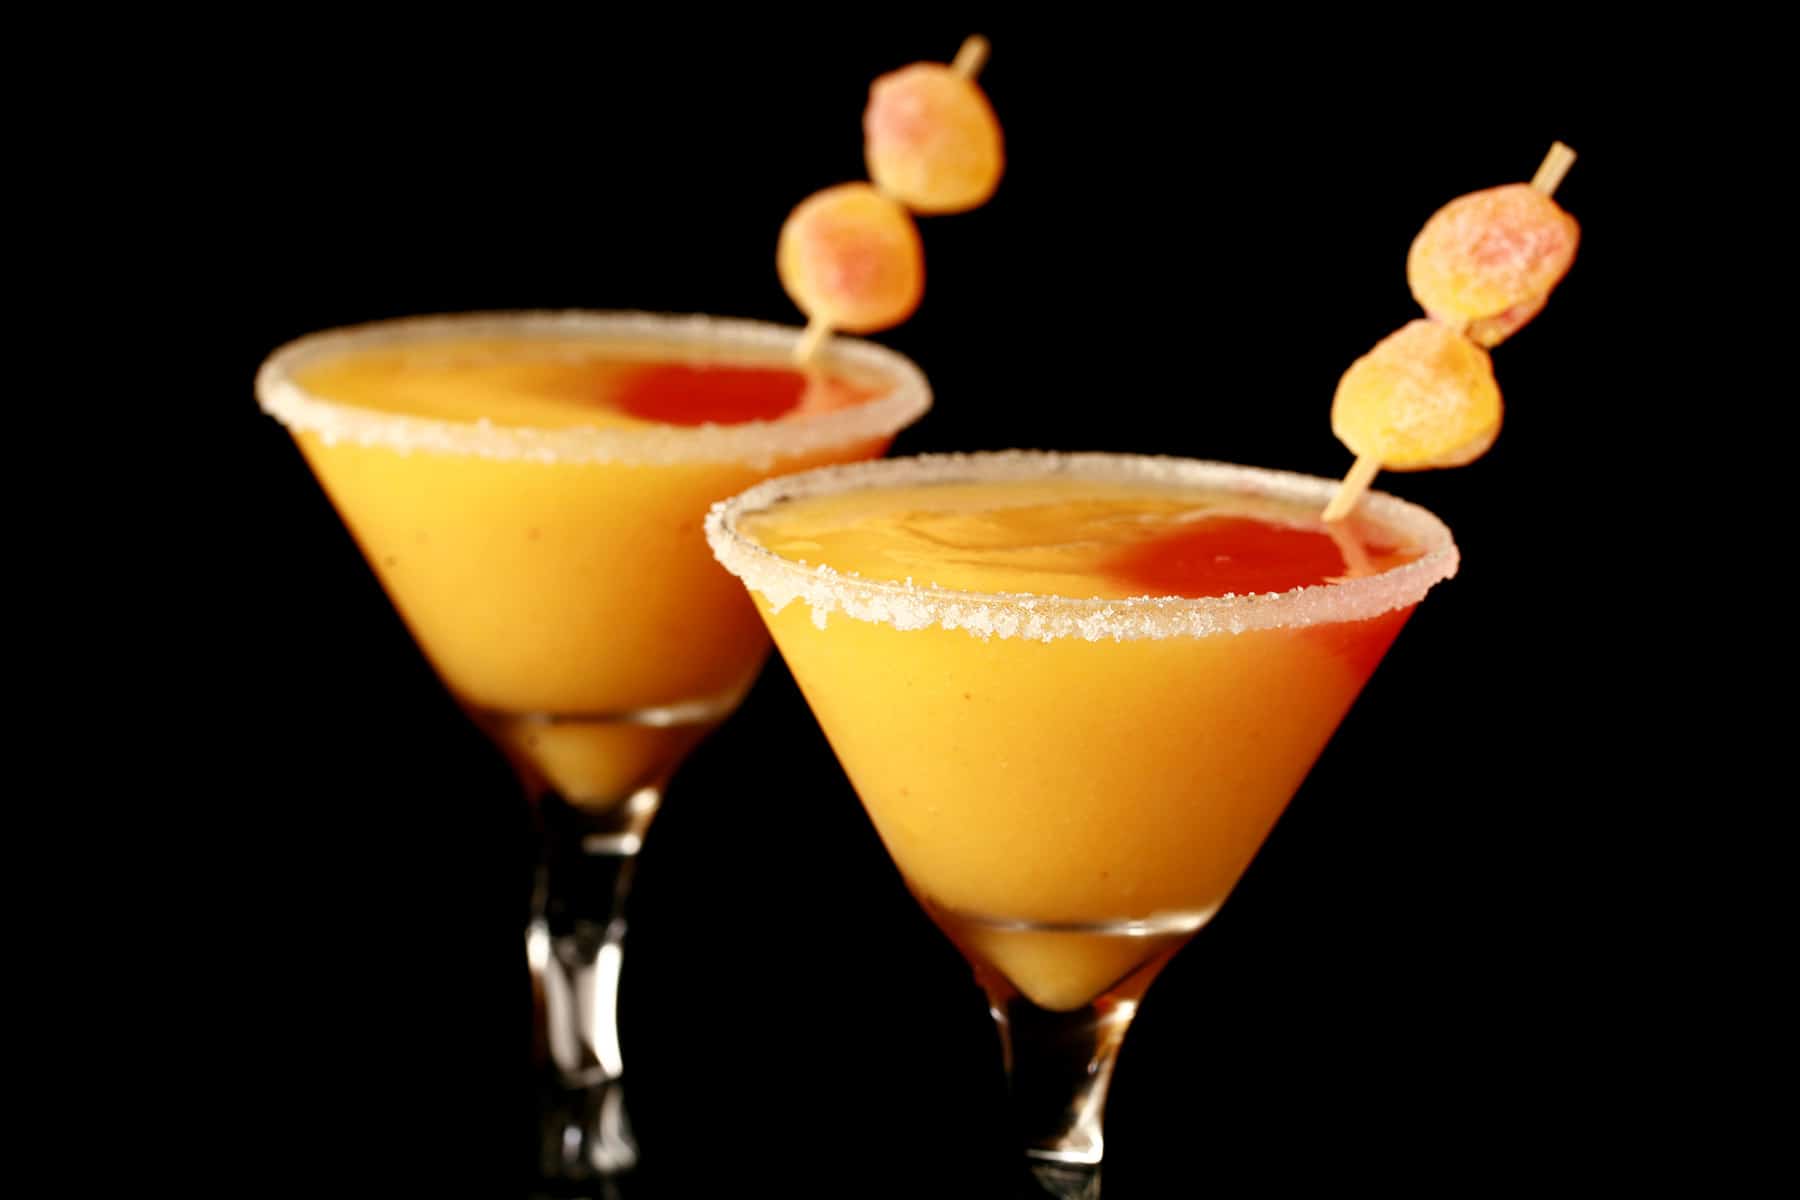 Two martini cocktail glasses with fuzzy peach candy cocktail - a peach coloured slush with a round section of red slush in it, garnished with gummy candies.